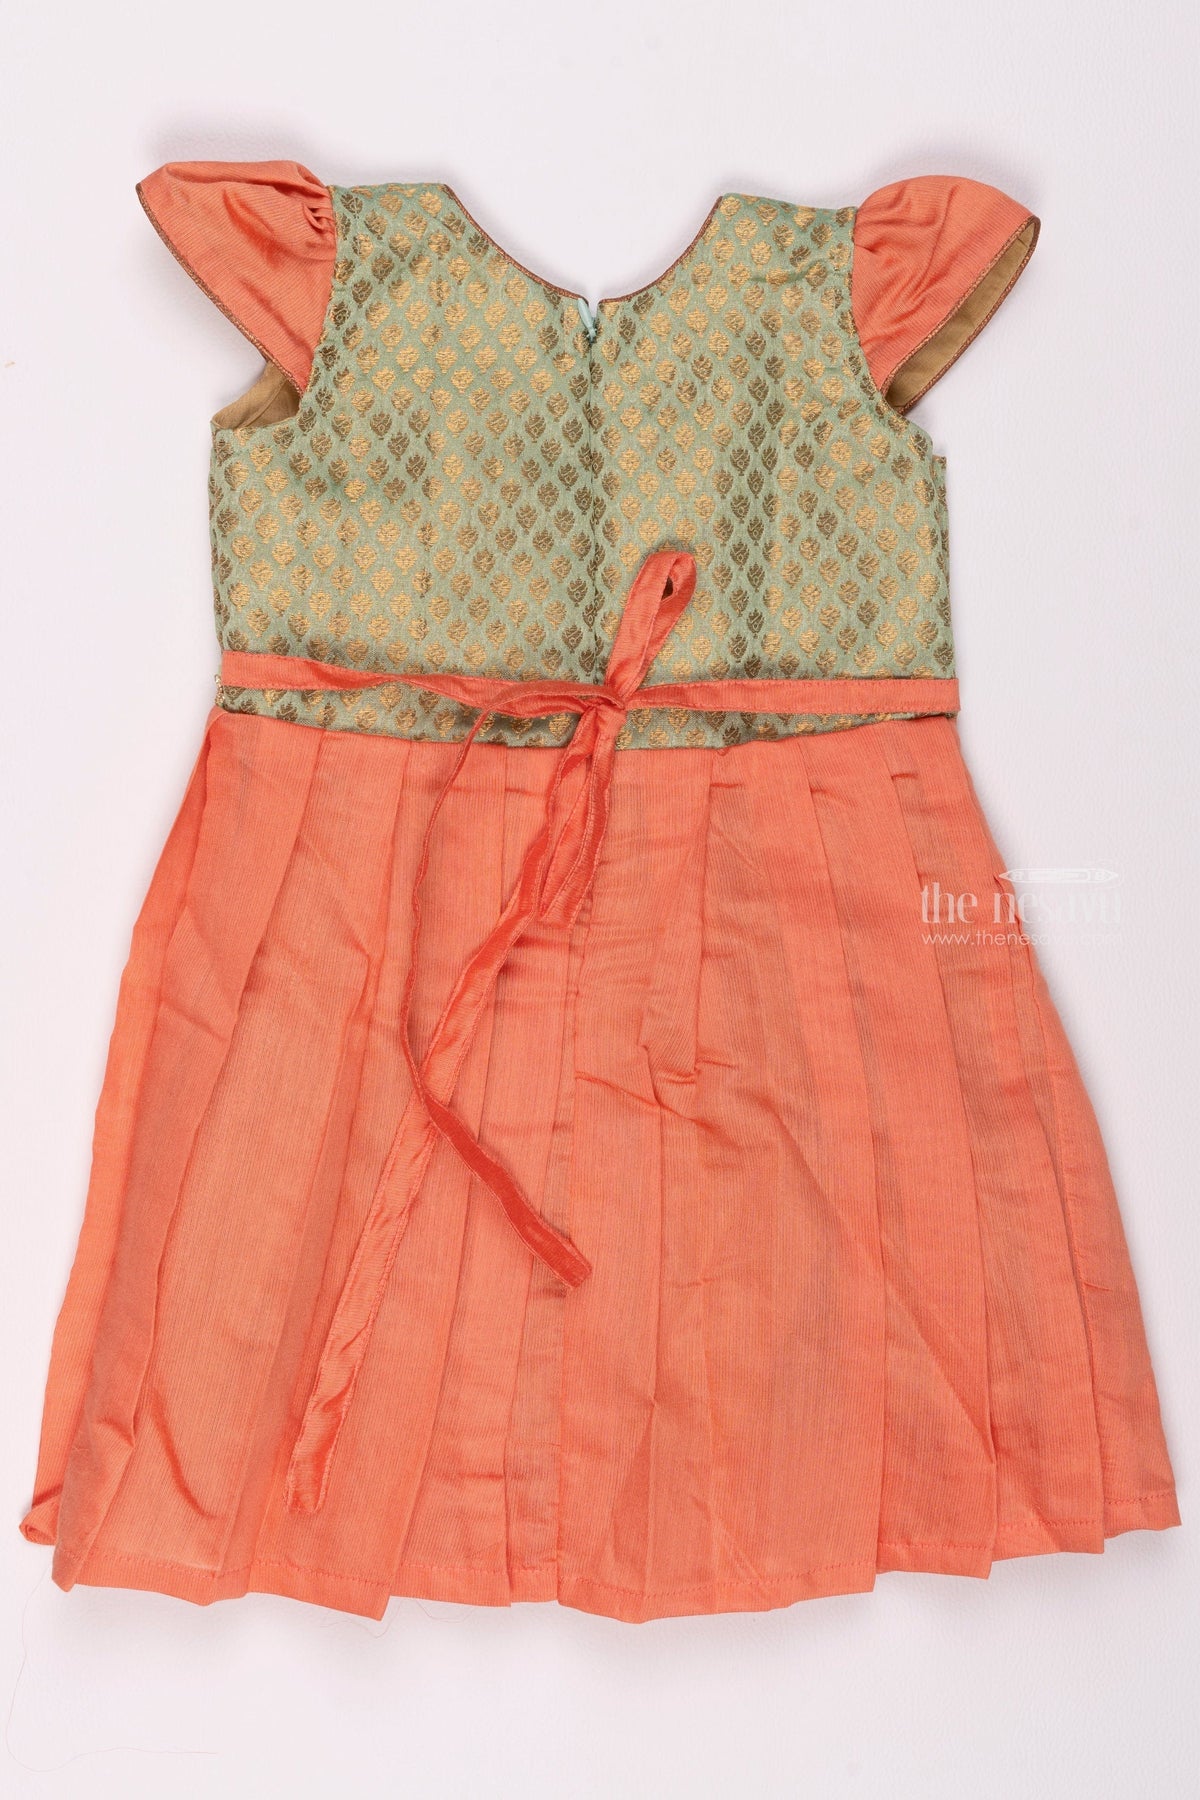 Readymade Pattu Frock Parrot Green for the Baby Dolls